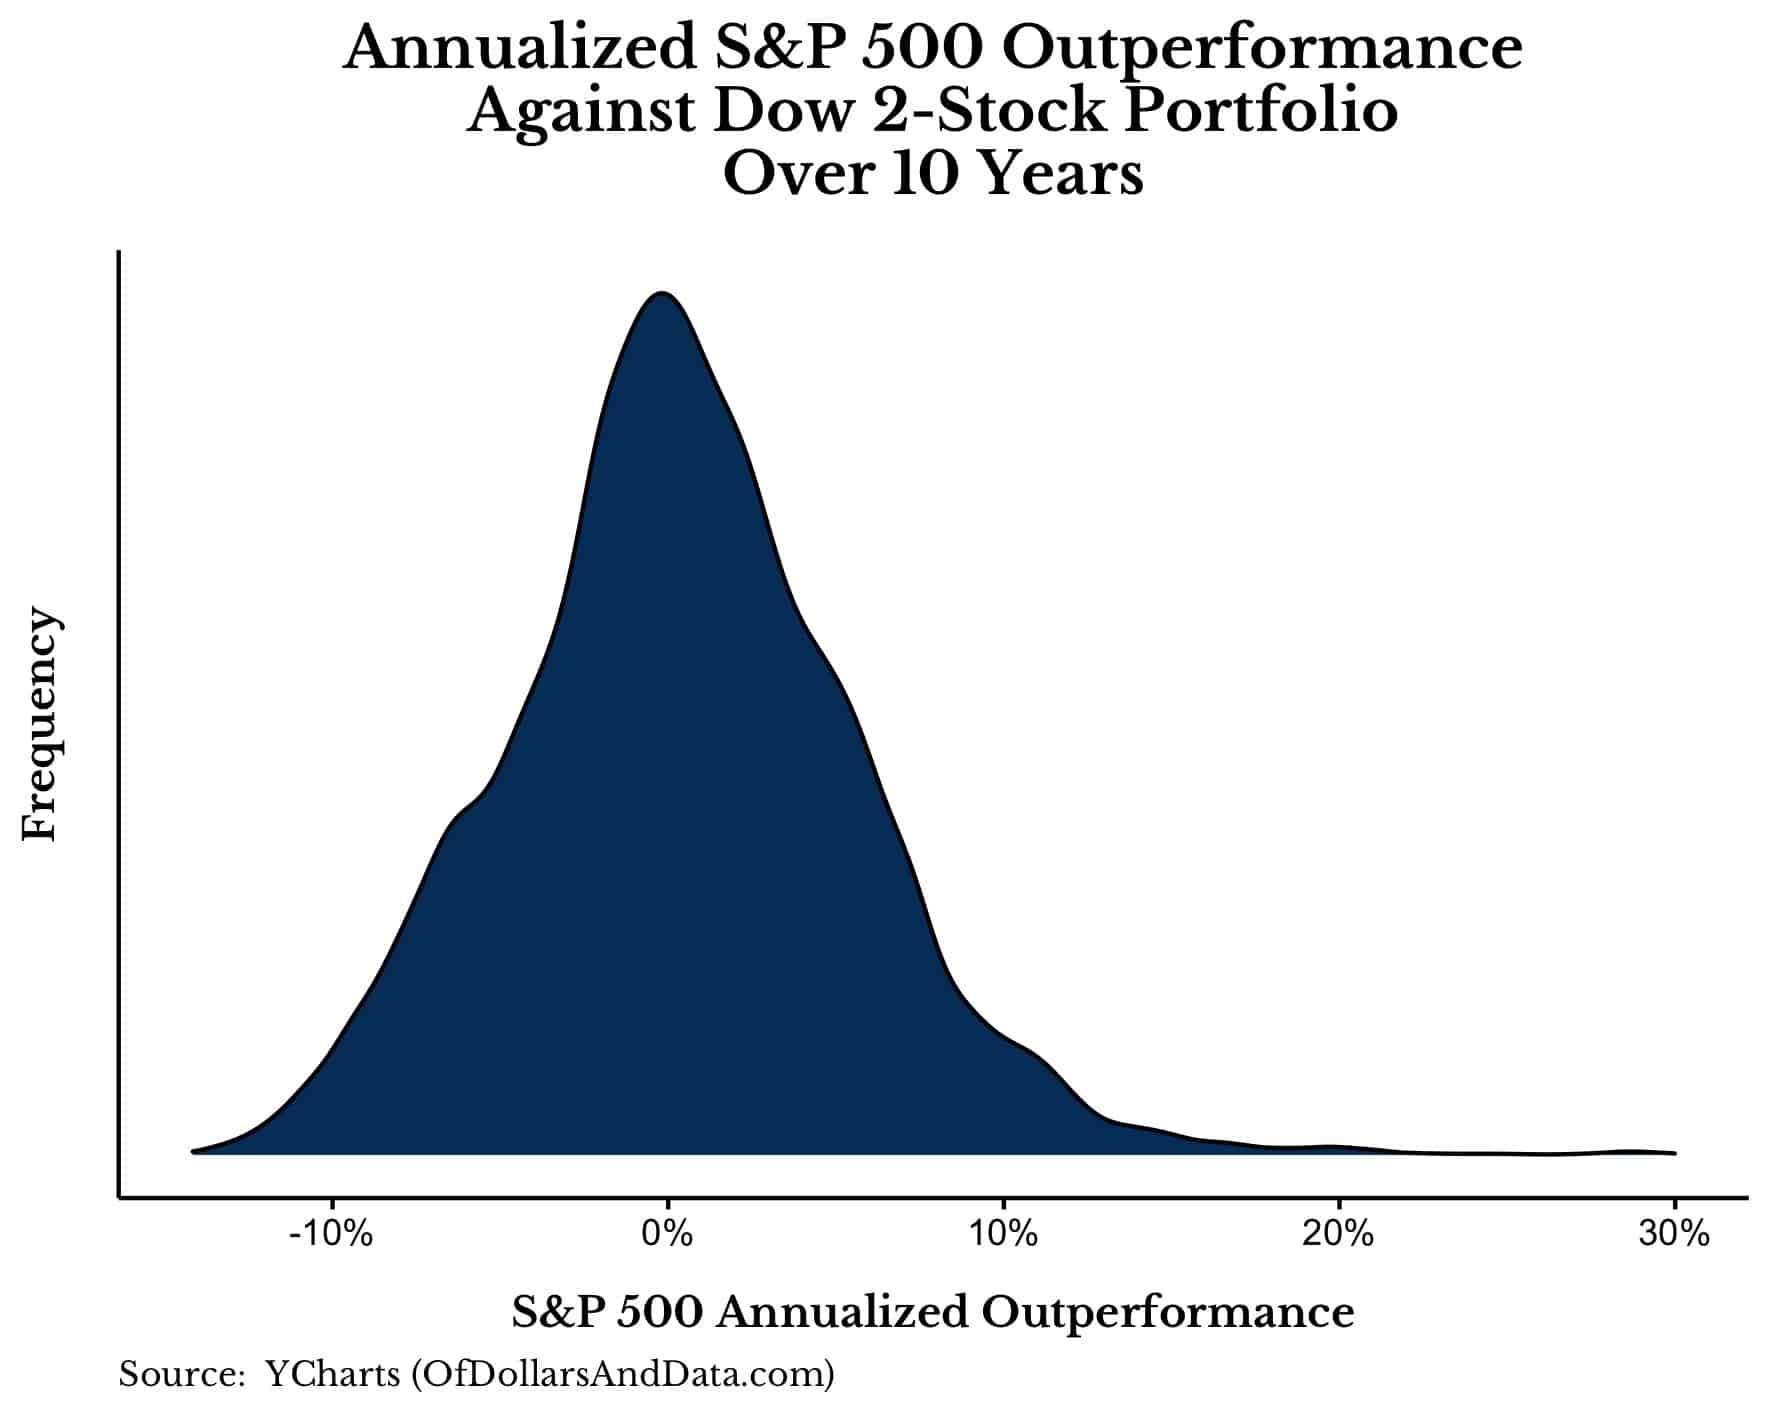 Annualized S&P 500 outperformance distribution against Dow 2-stock portfolios over 10 years